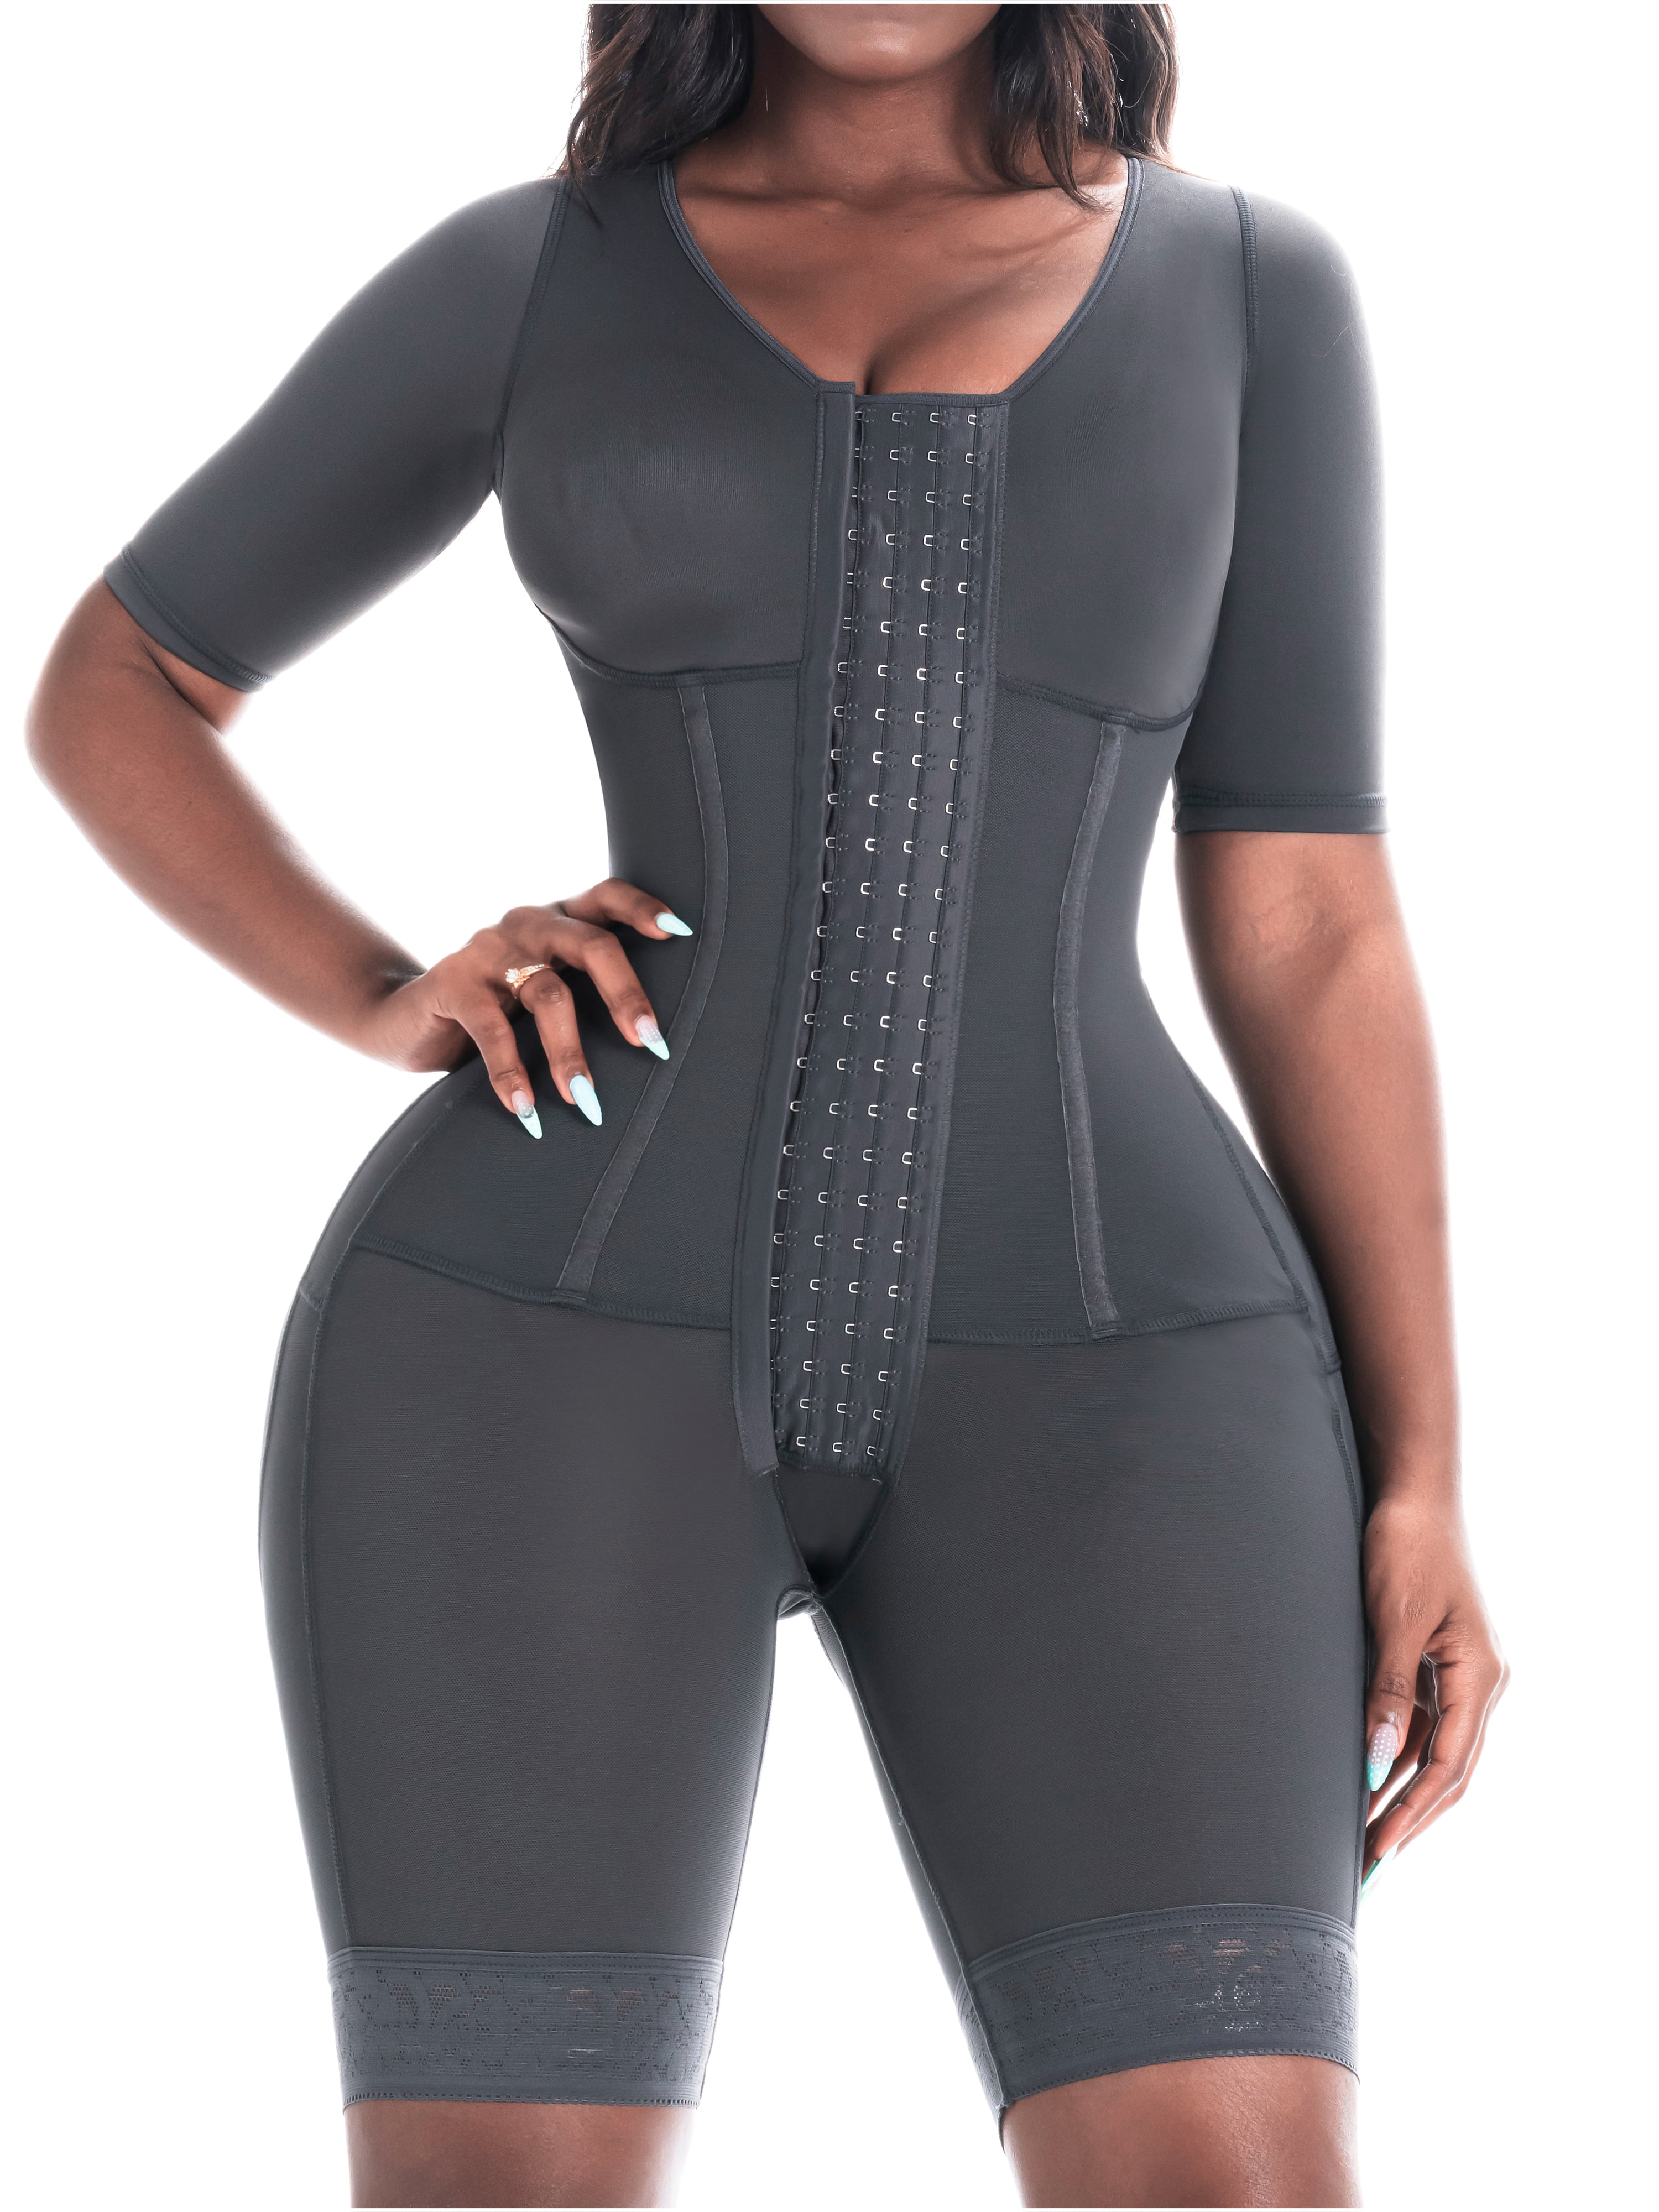 Novabell Shapers – Womens and Mens Body Shapers